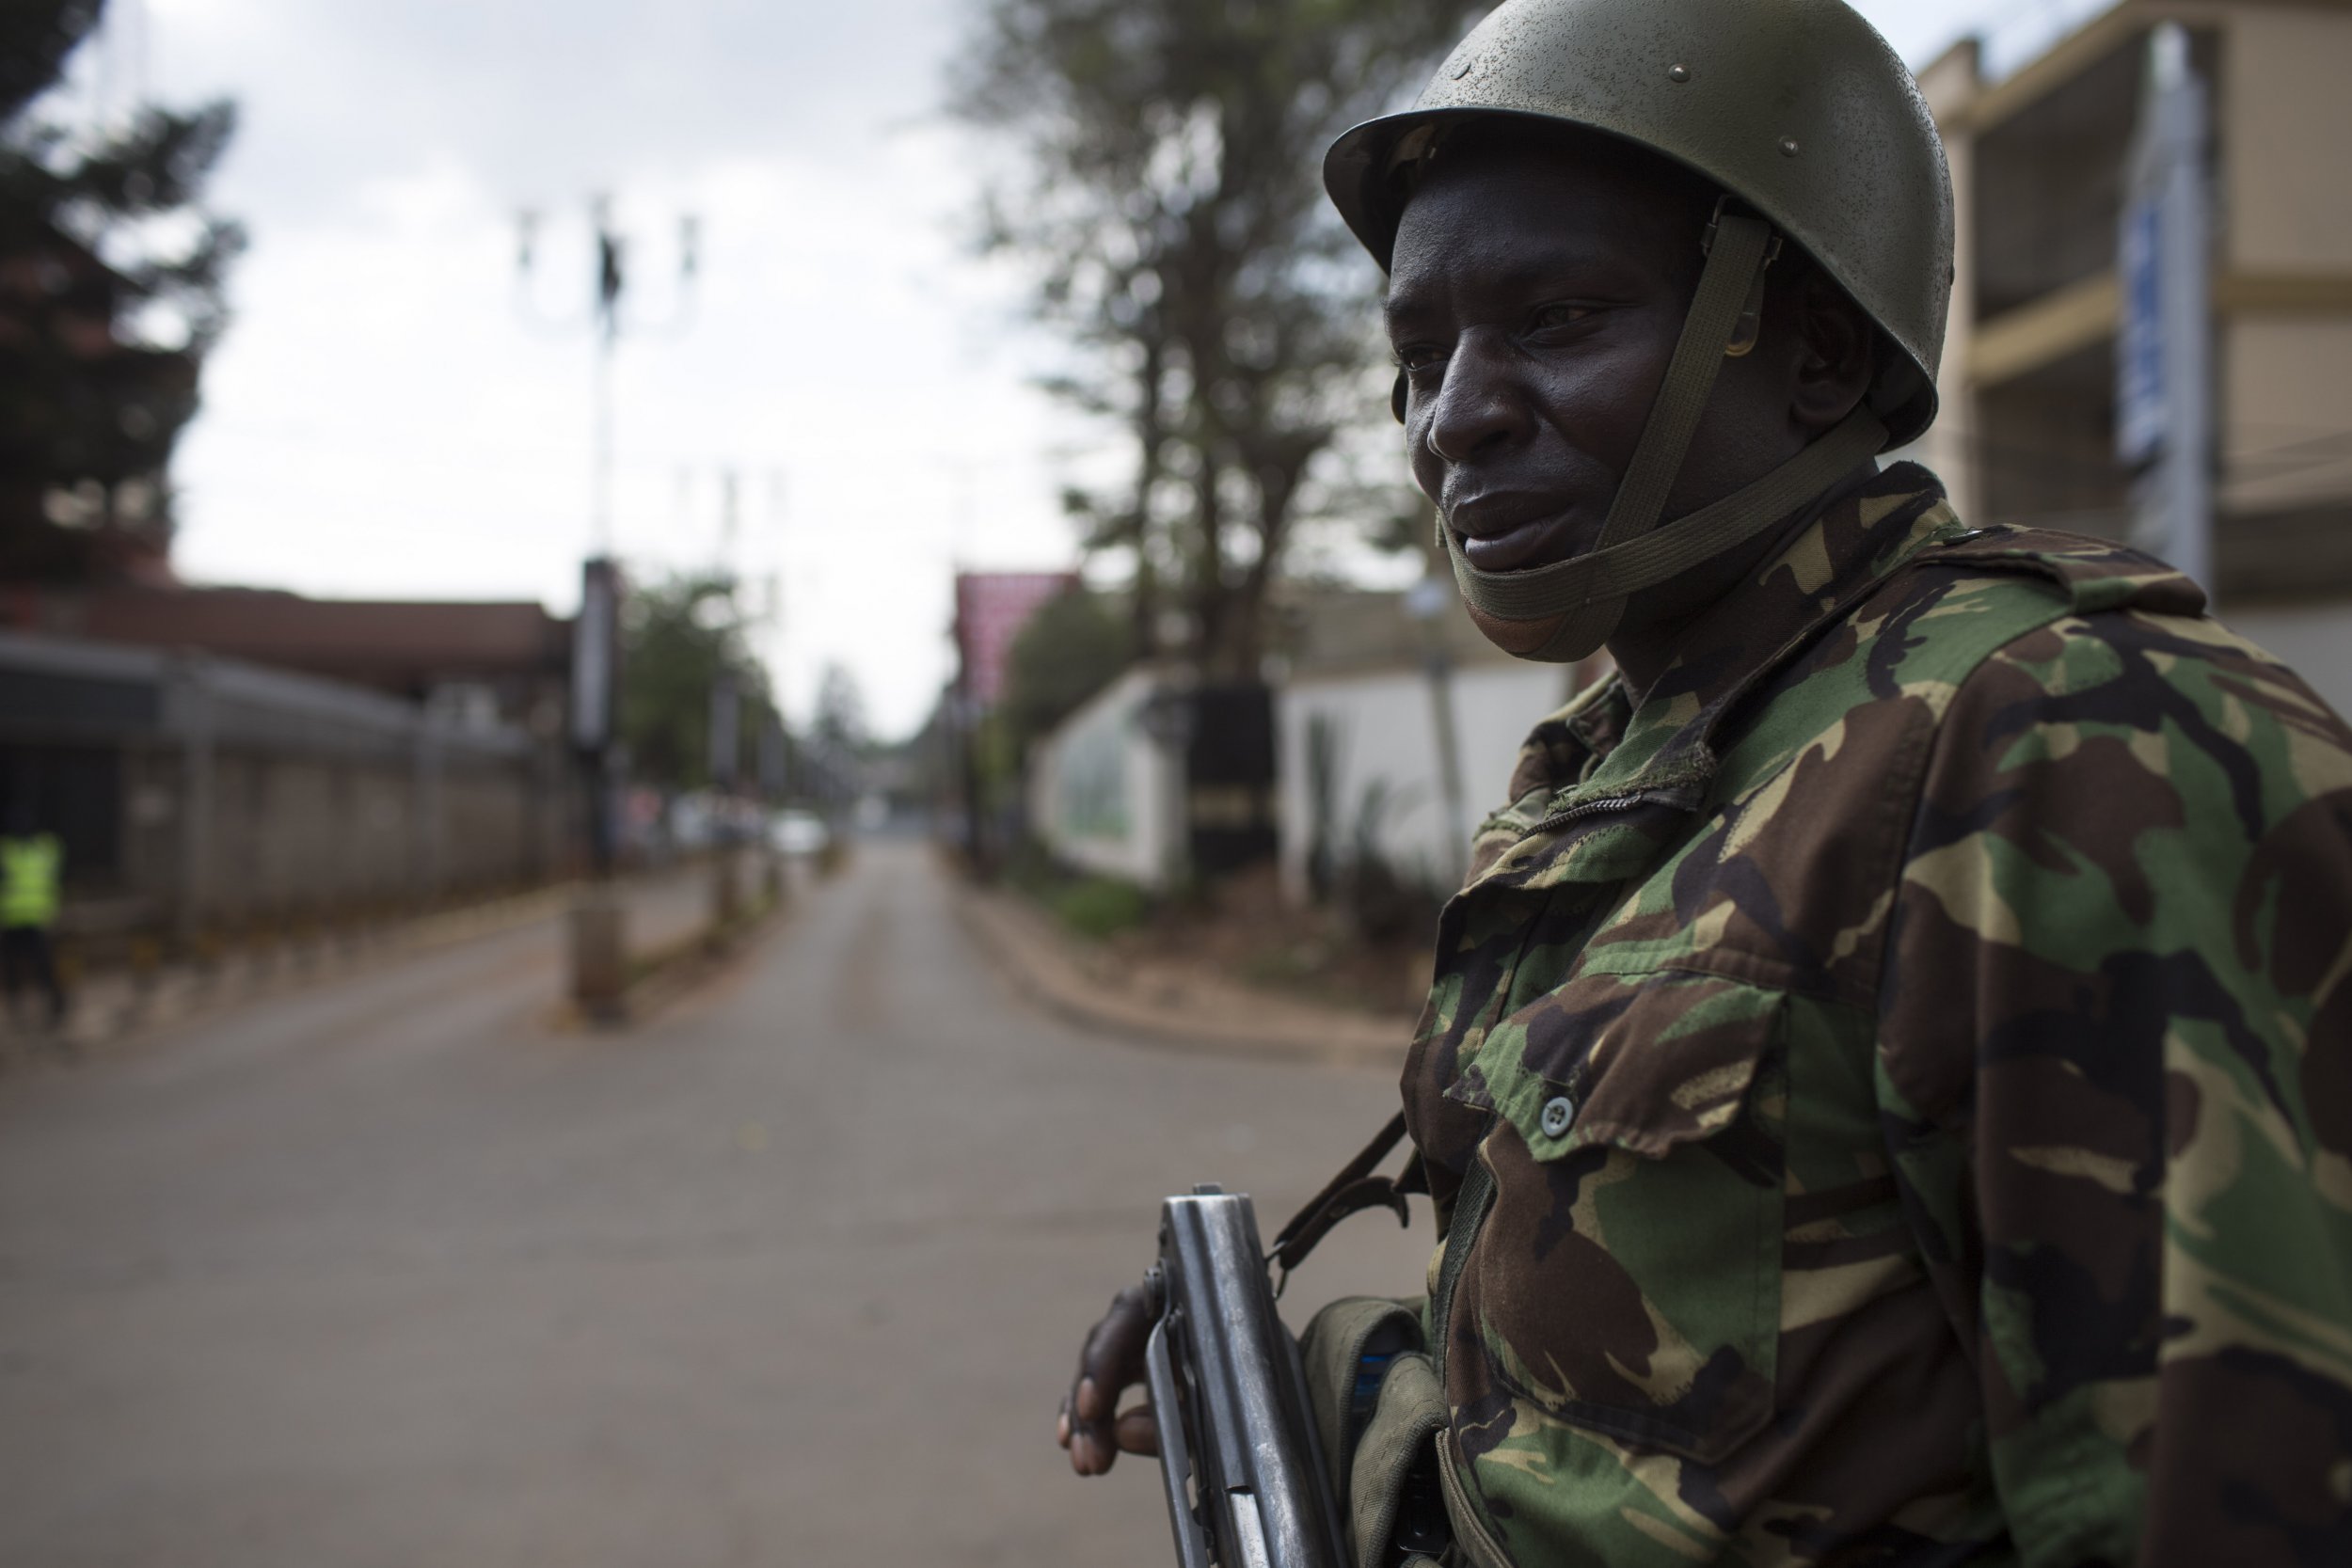 A Kenyan police officer stands guard near the Westgate mall.